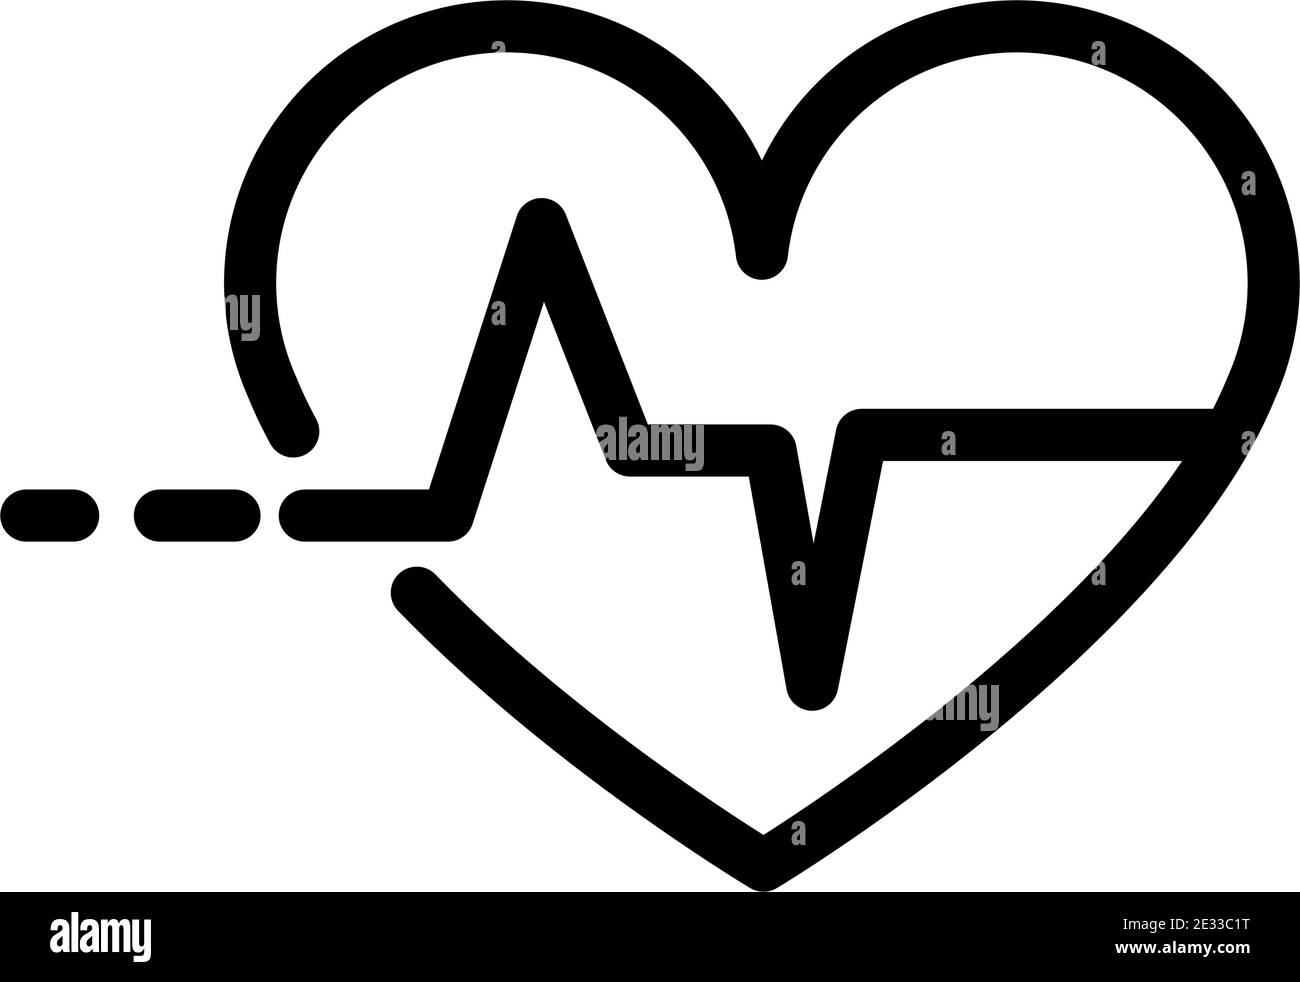 Ecg chart Black and White Stock Photos & Images - Alamy